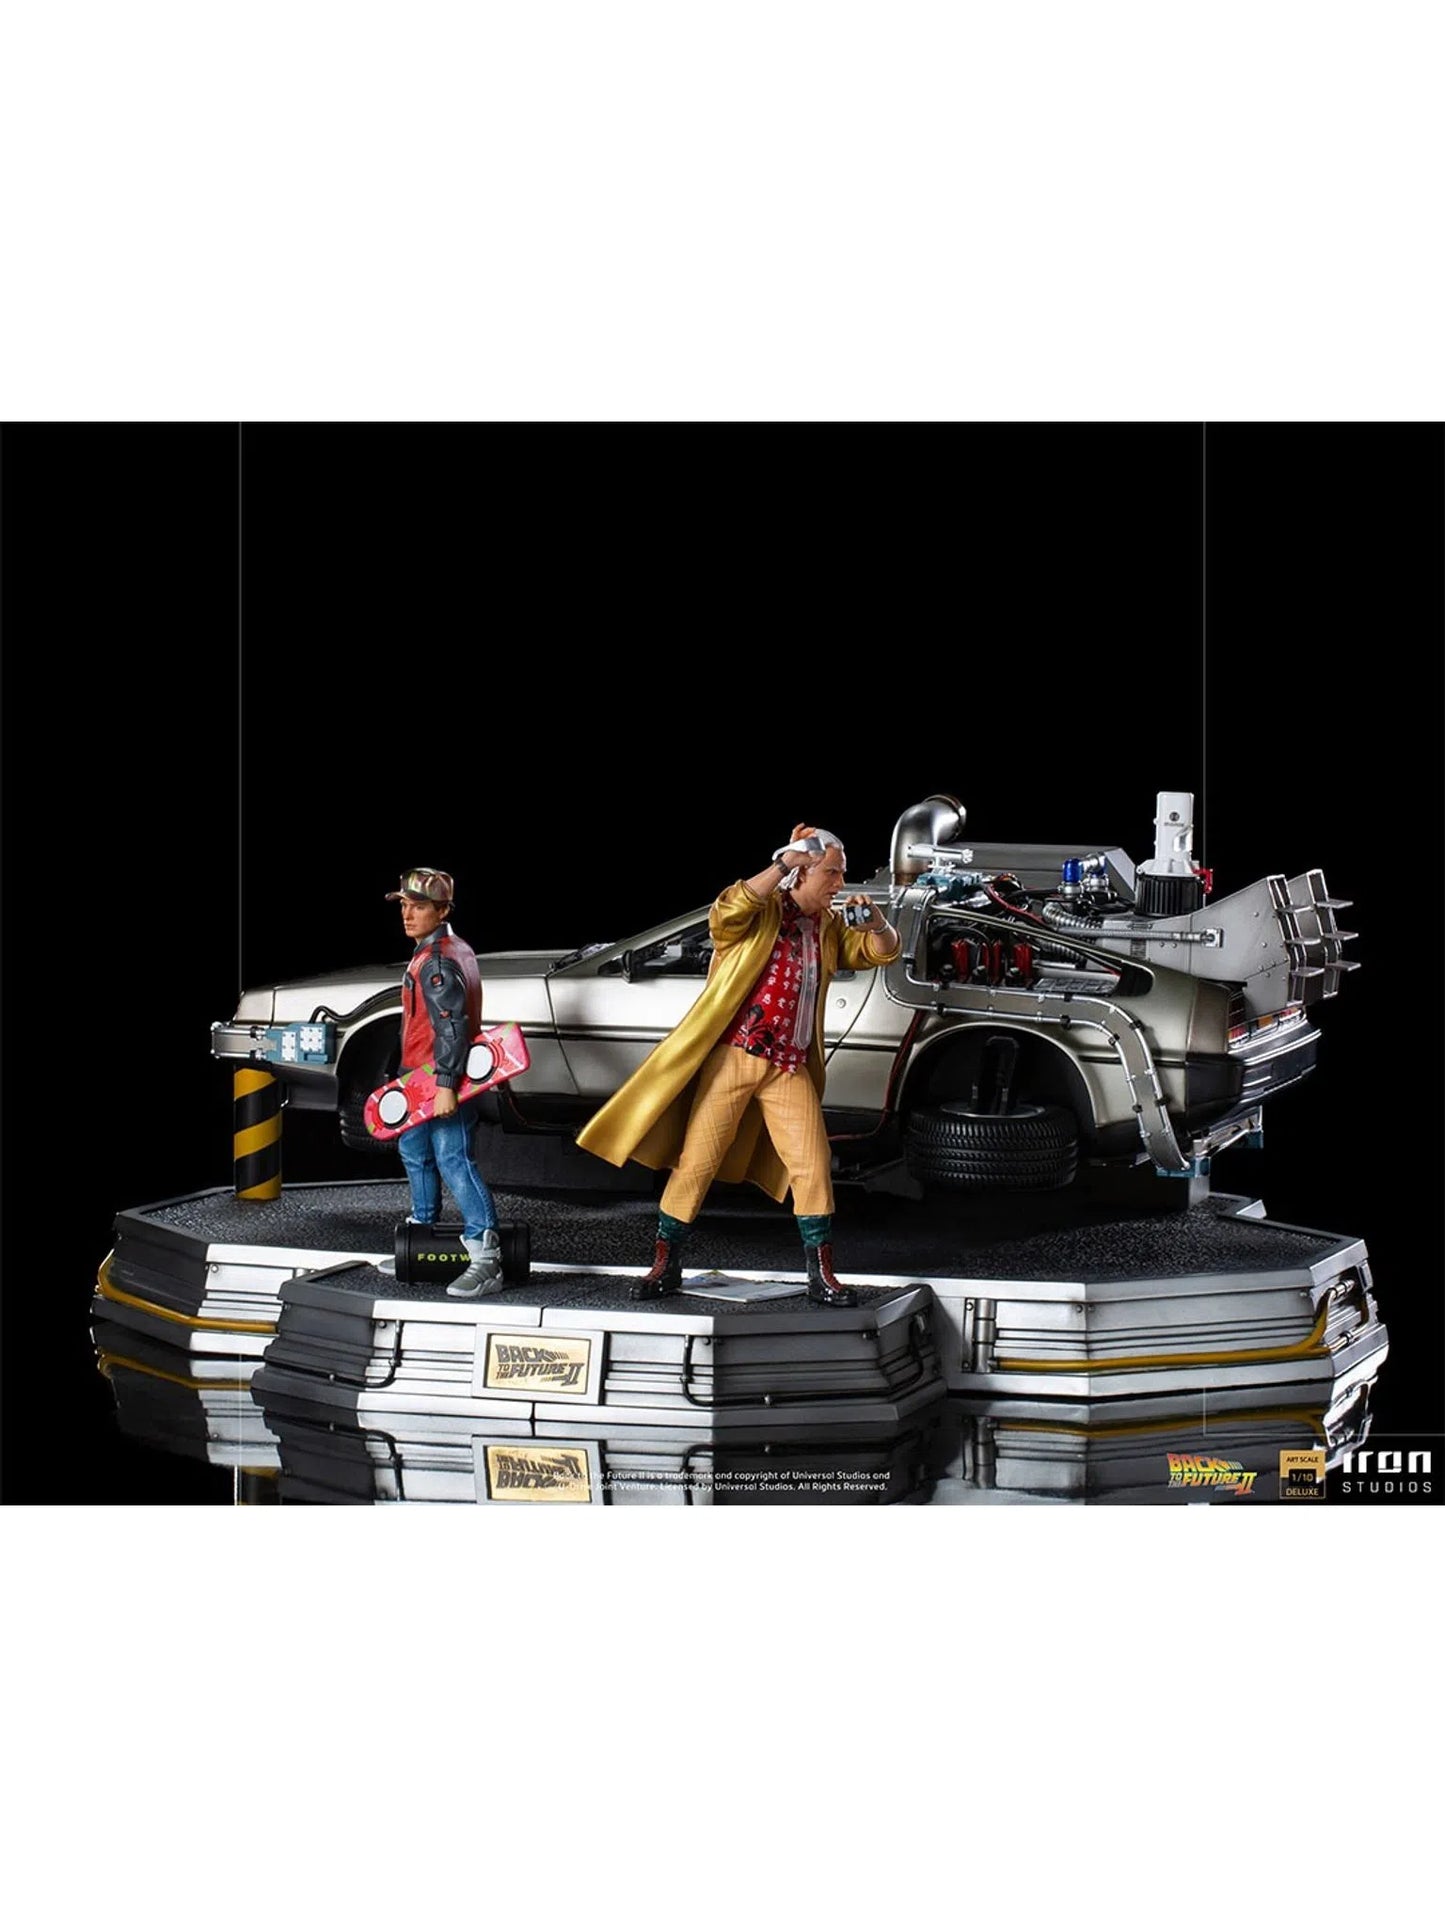 IRON STUDIOS DELOREAN FULL SET DELUXE ‚ BACK TO THE FUTURE PART II ART SCALE 1/10 -  UNBTTF51021-10 - Anotoys Collectibles